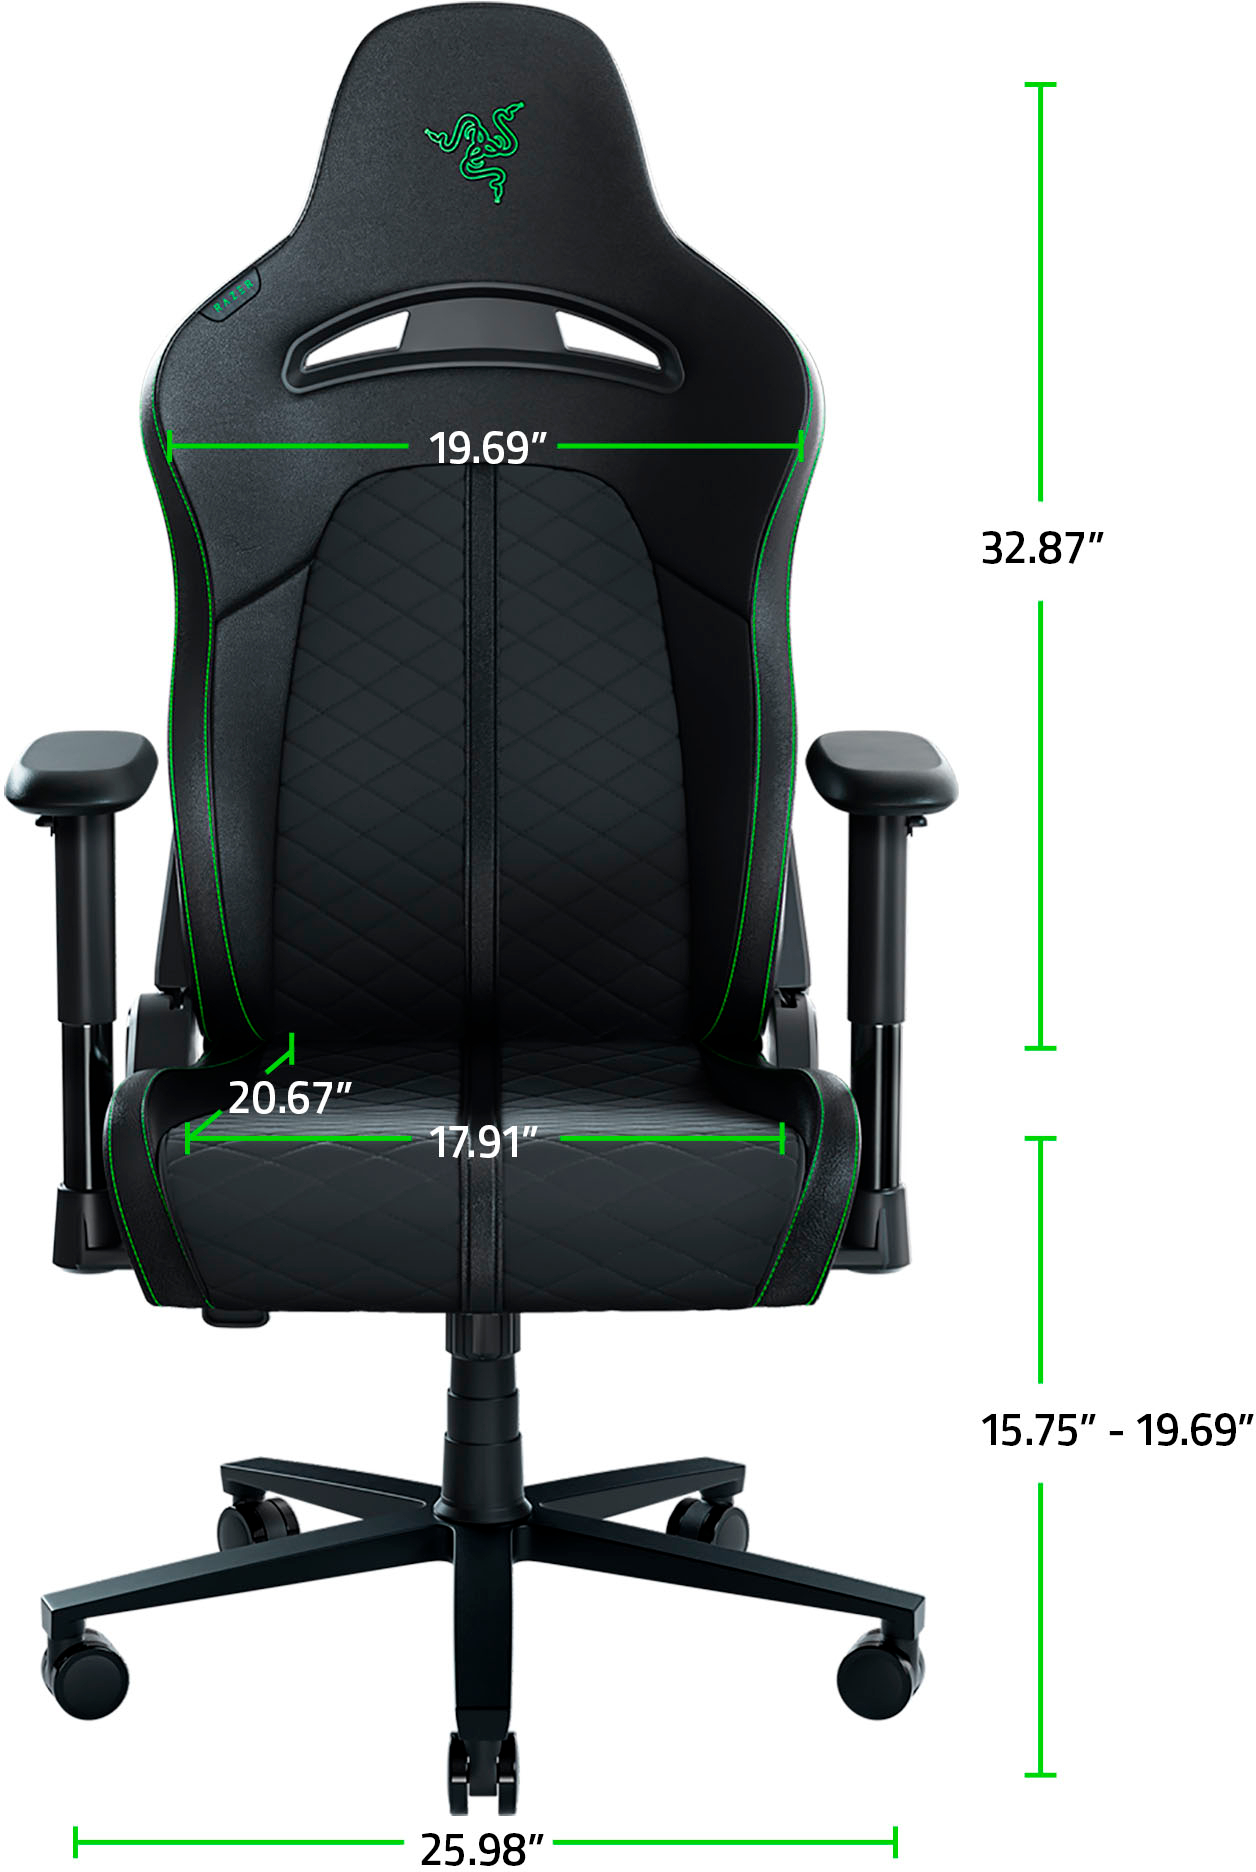 Angle View: Razer - Enki X Essential Gaming Chair for All-Day Comfort - Black/Green